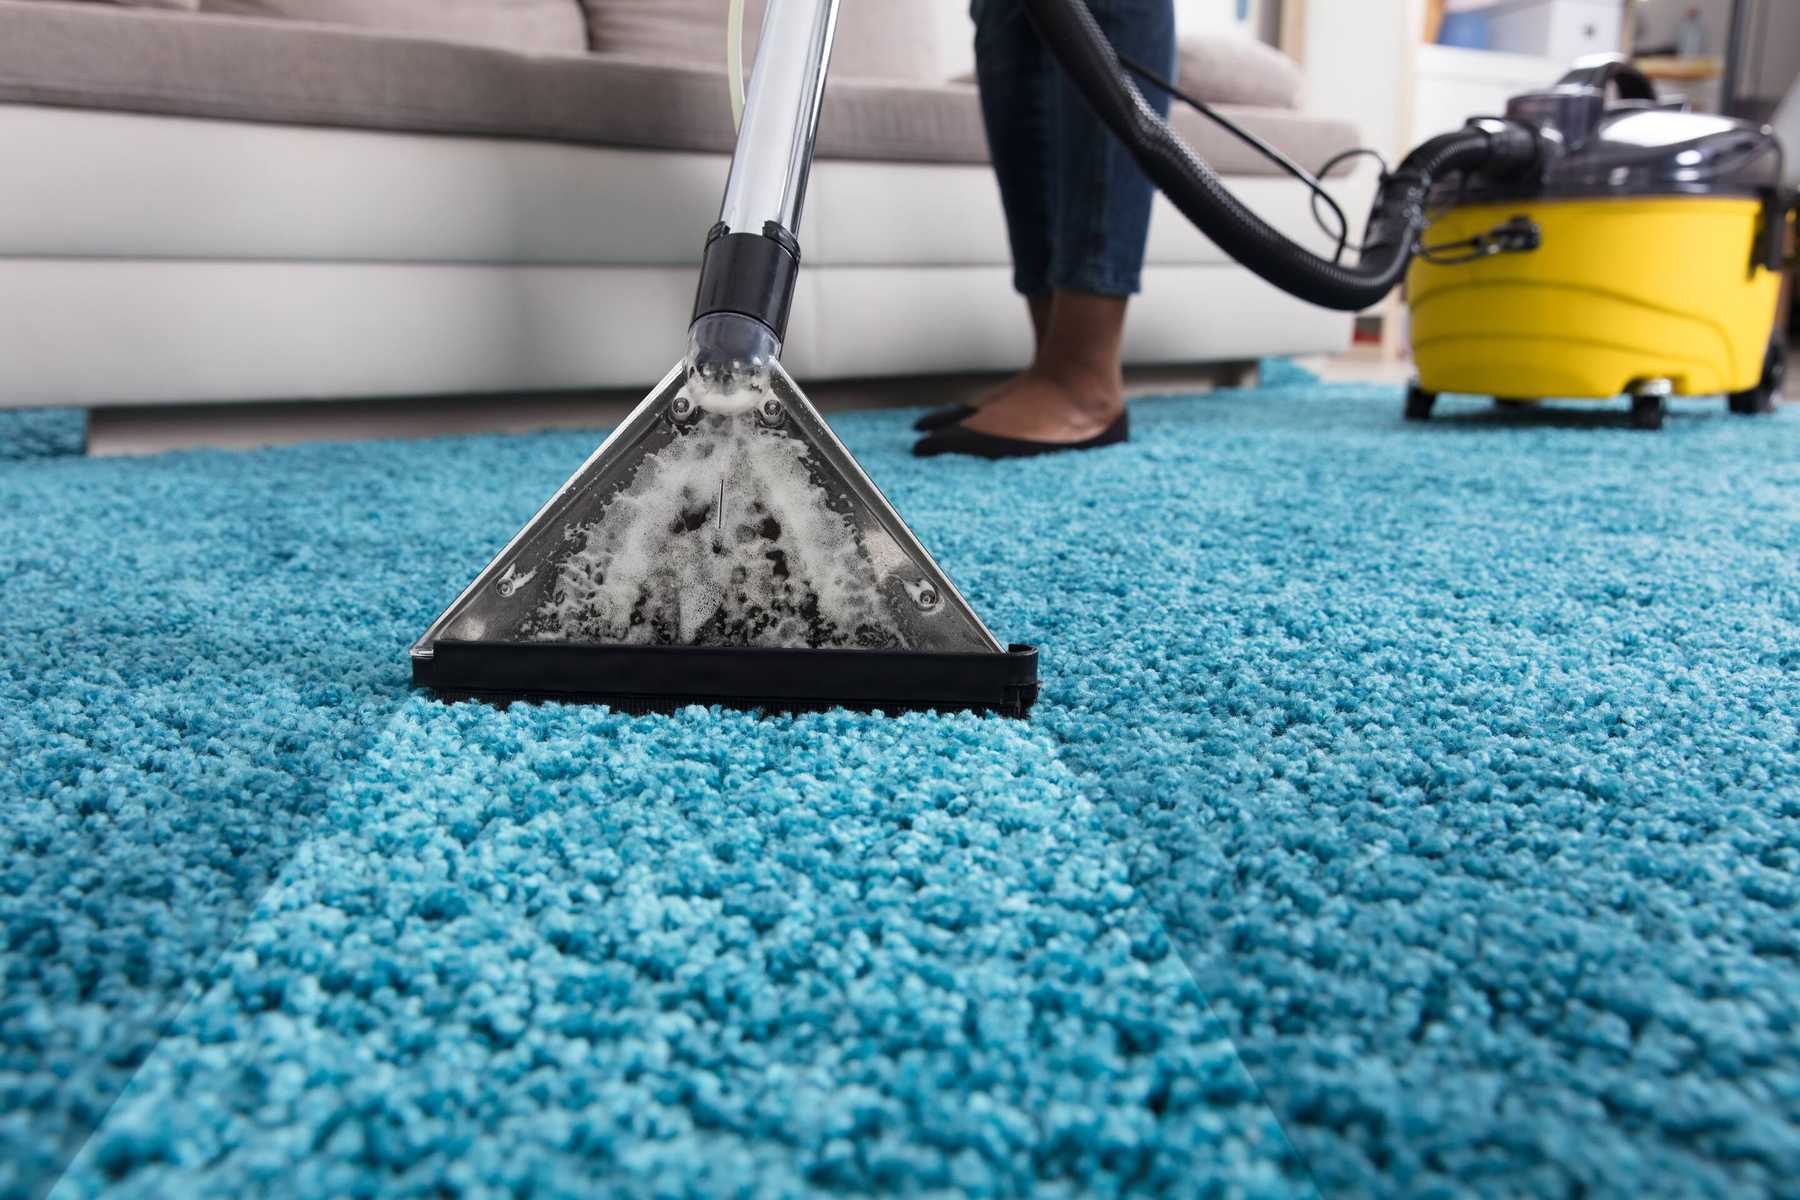 Carpet Cleaning Equipment's in Budget for Making Carpet Long Lasting